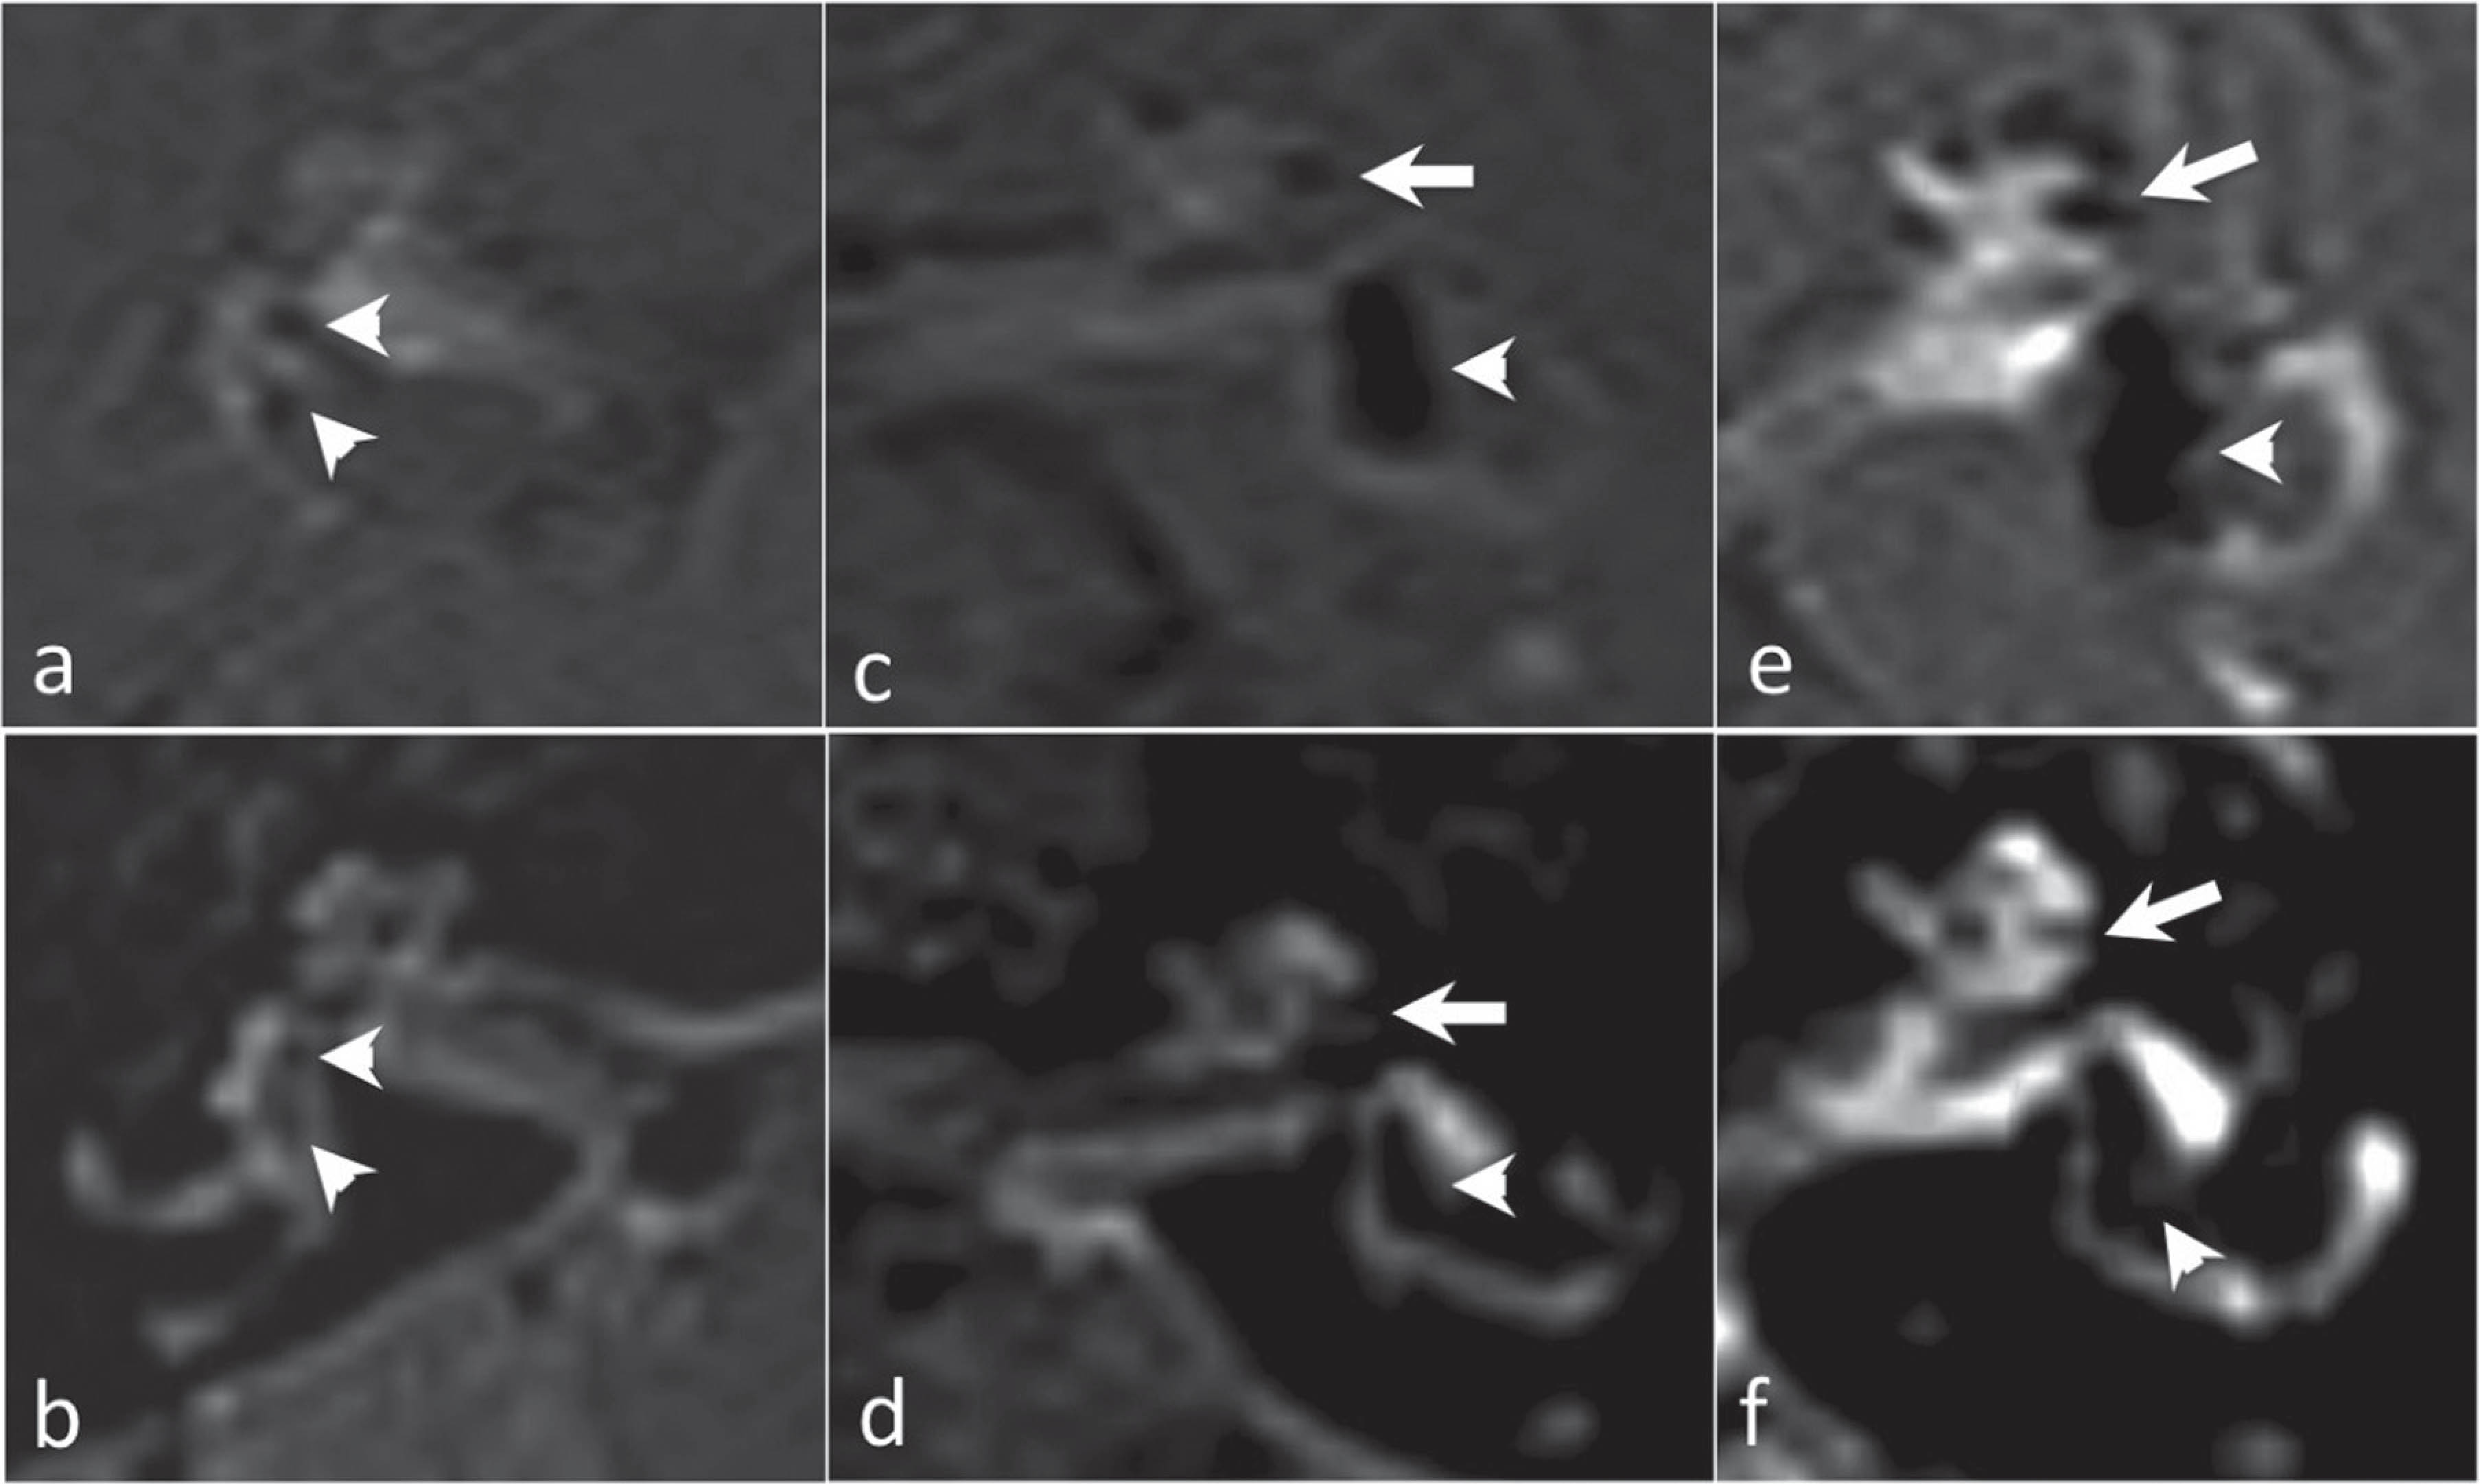 a,c,e, 3D-IR sequences. b,d,f, 3D-FLAIR sequences. No EH in a and b. The saccule and the utricle are depicted separately in the vestibule (arrowheads) and no signifi cative engorgement of the cochlear duct is detected.